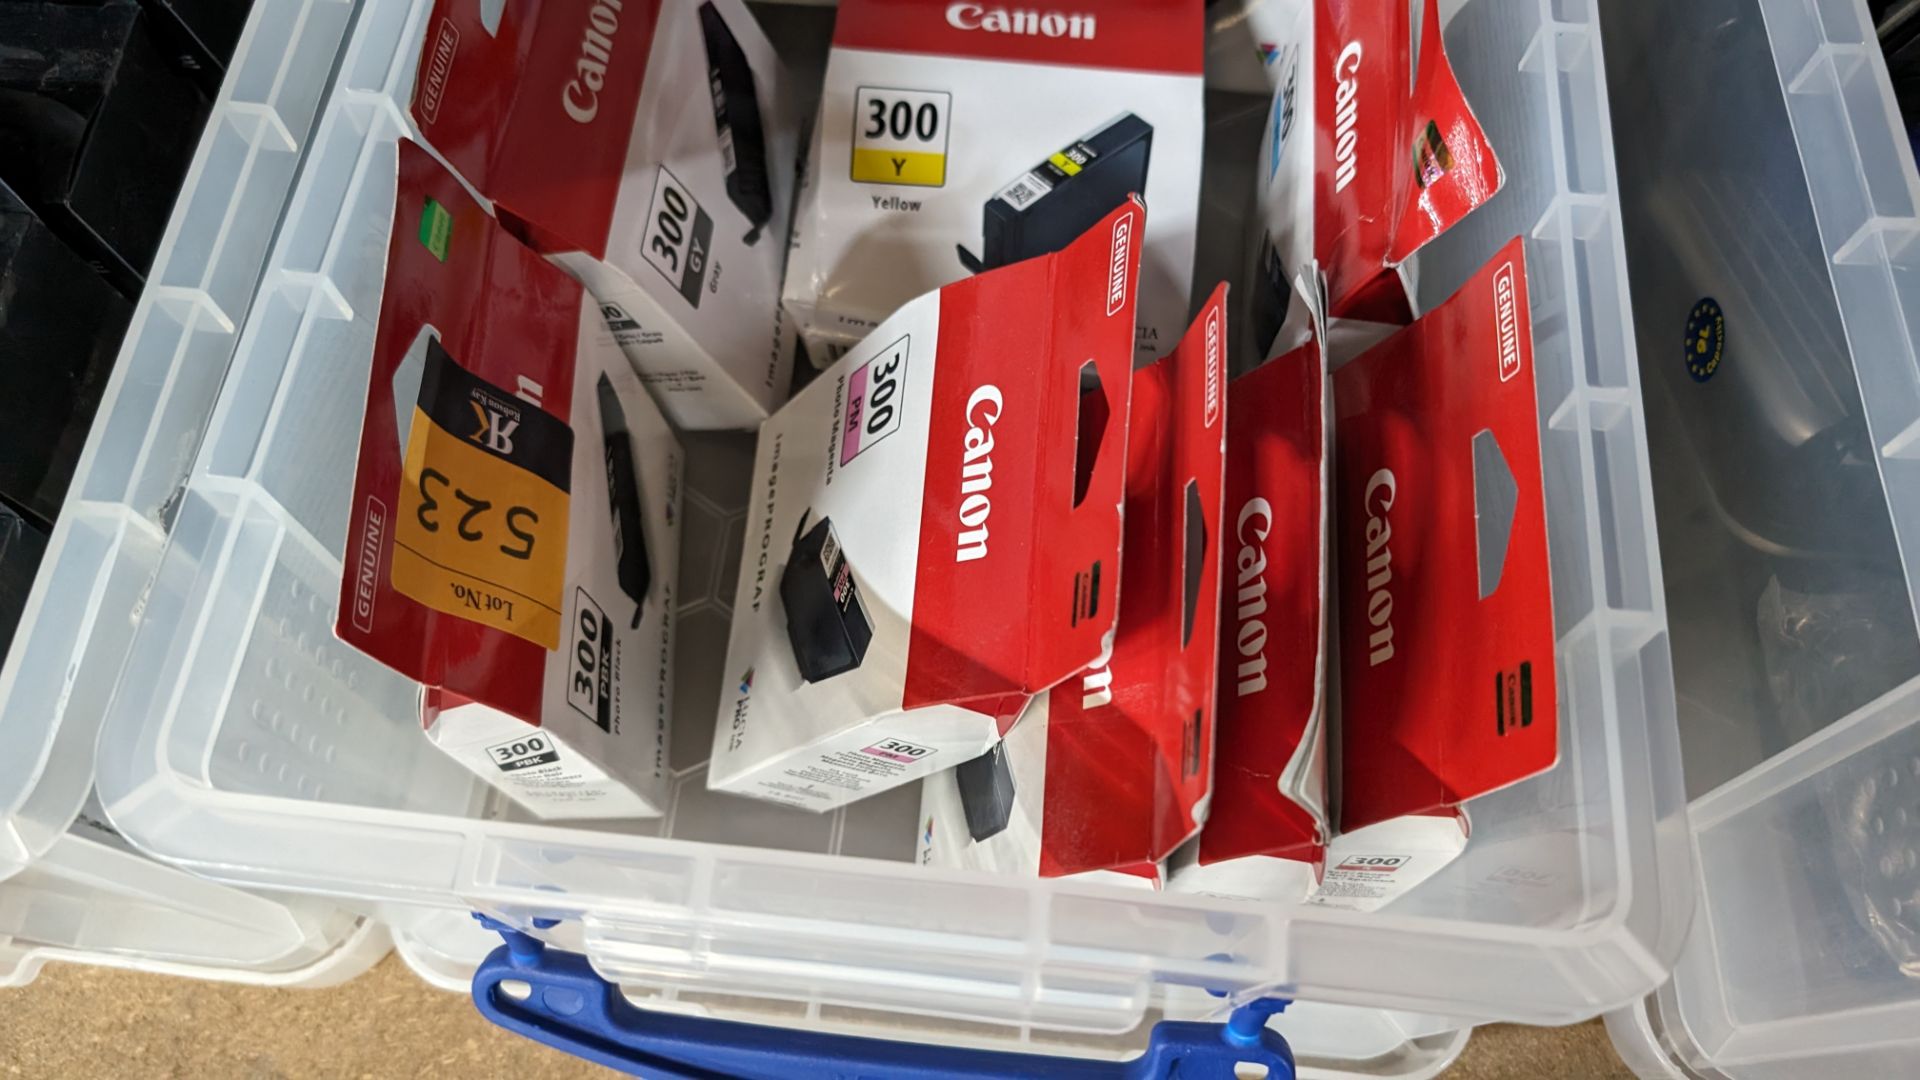 10 off assorted Canon inkjet cartridges - Image 6 of 9